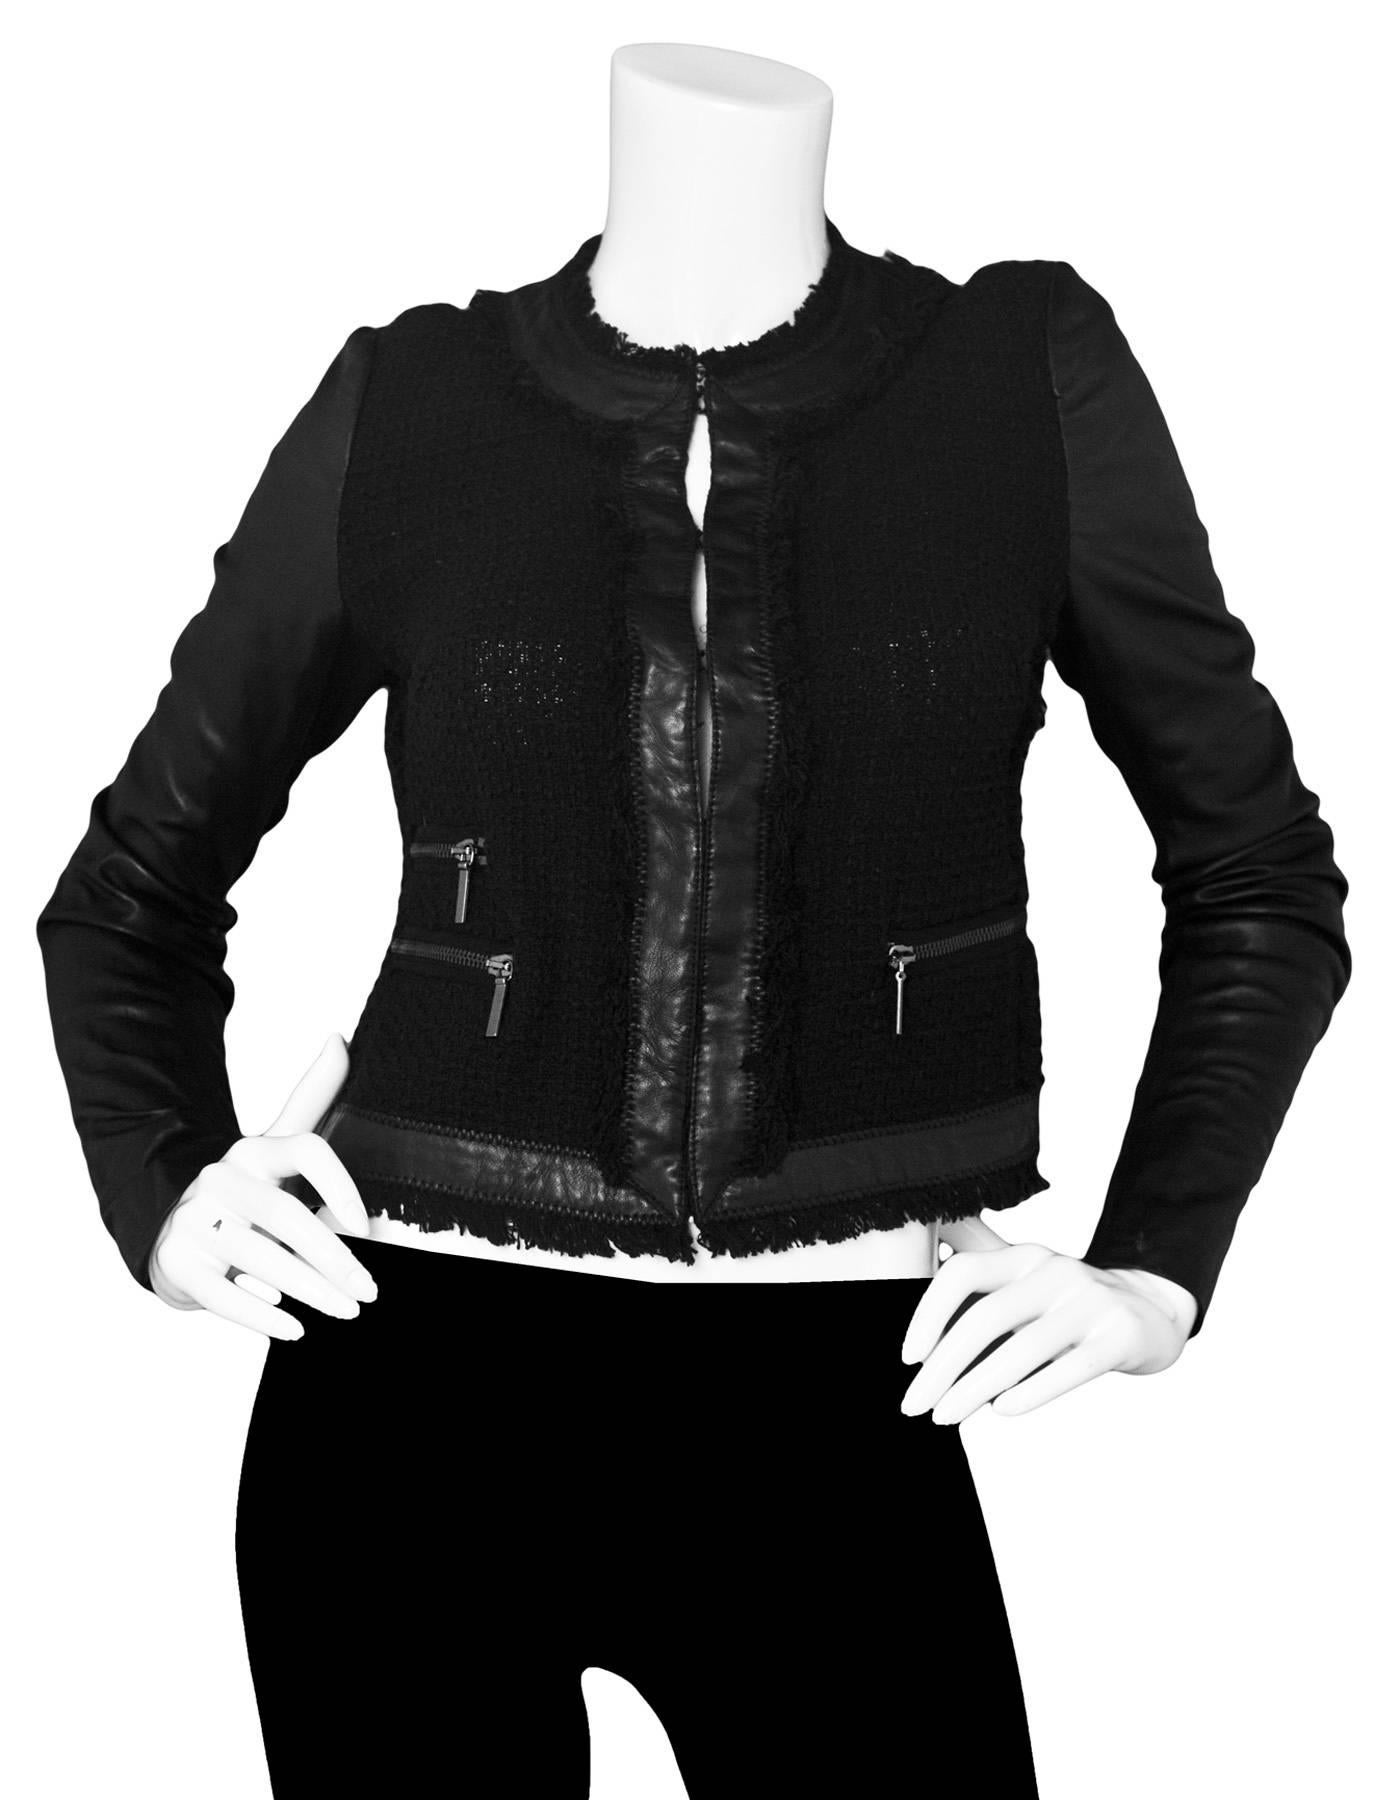 Rebecca Taylor Black Jacket with Leather Trim Sz 4
Features black leather sleeves with fringe and leather trim

Made In: China
Color: Black
Composition: 60% Cotton, 33% polyester, 7% wool
Lining: None
Closure/Opening: Front hook and eye